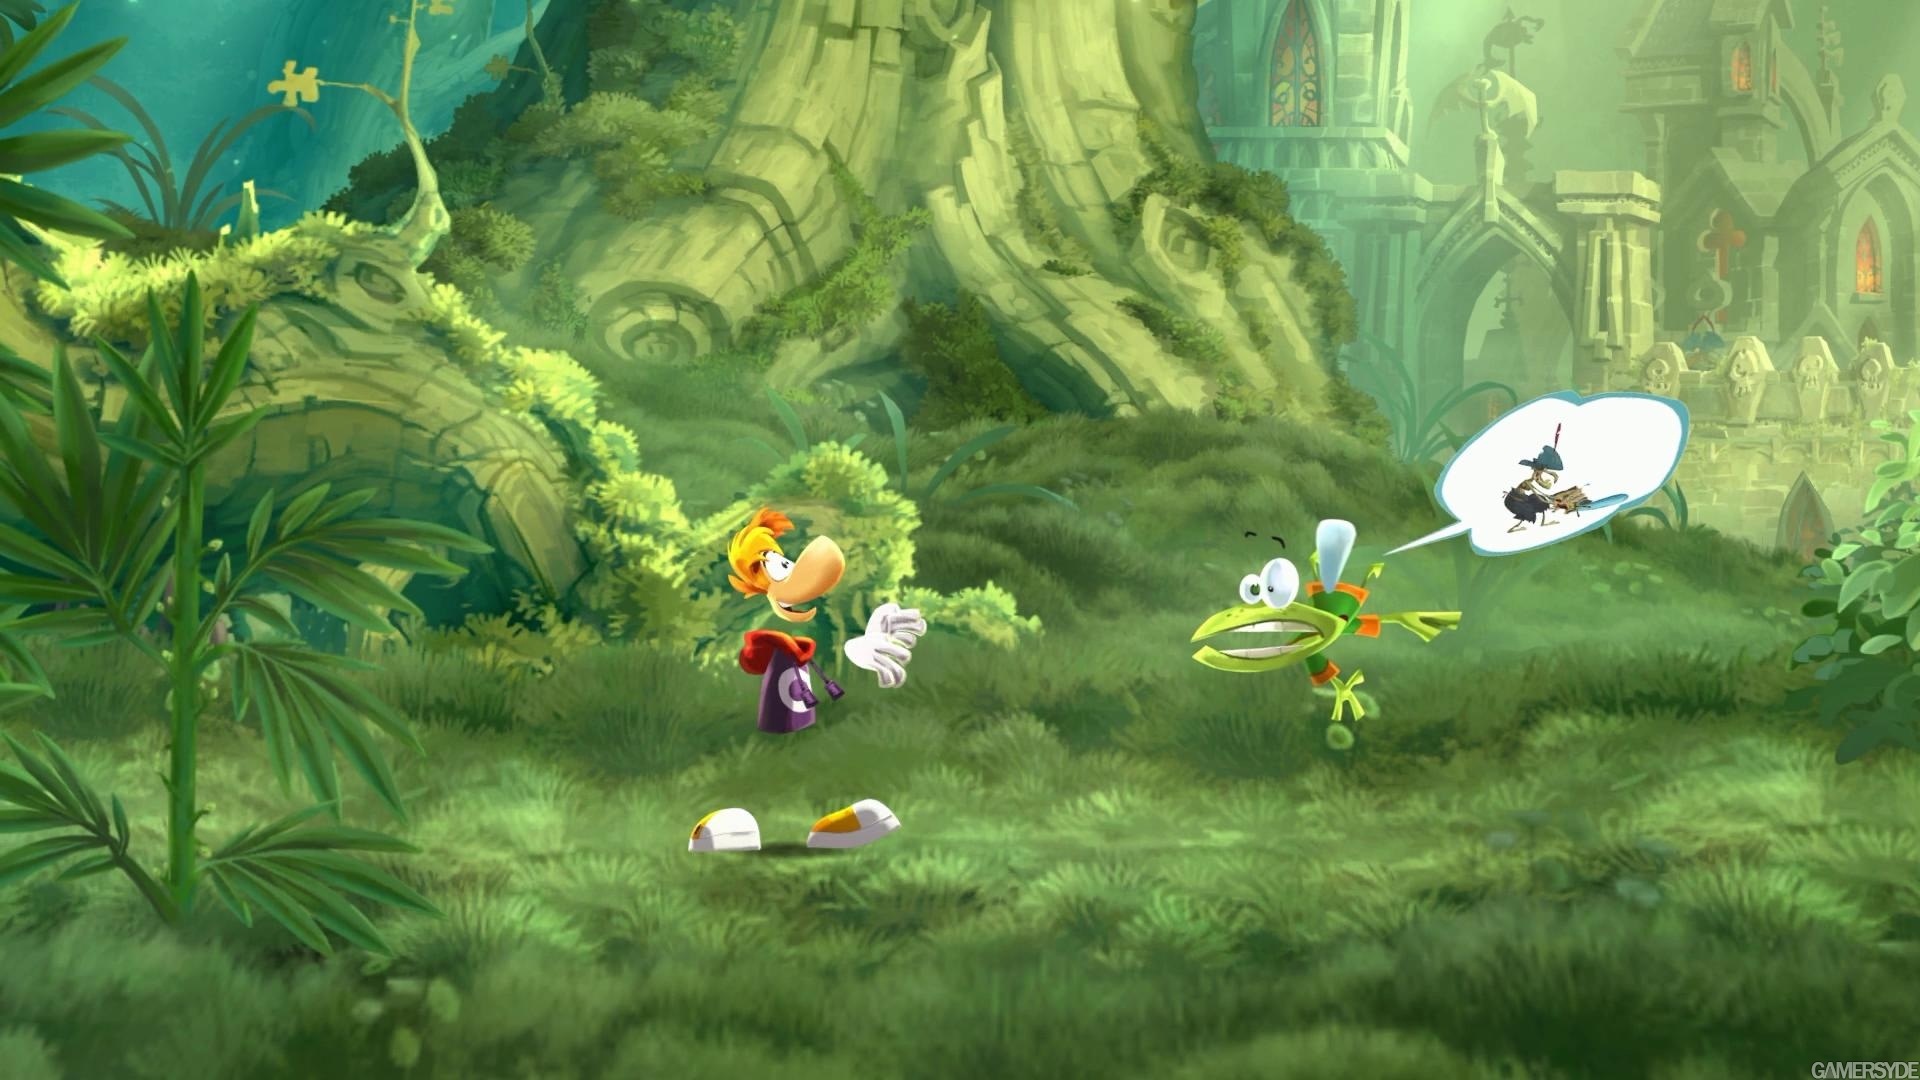 Rayman Legends - Walkthrough Gloo Gloo (FR) - High quality stream and  download - Gamersyde